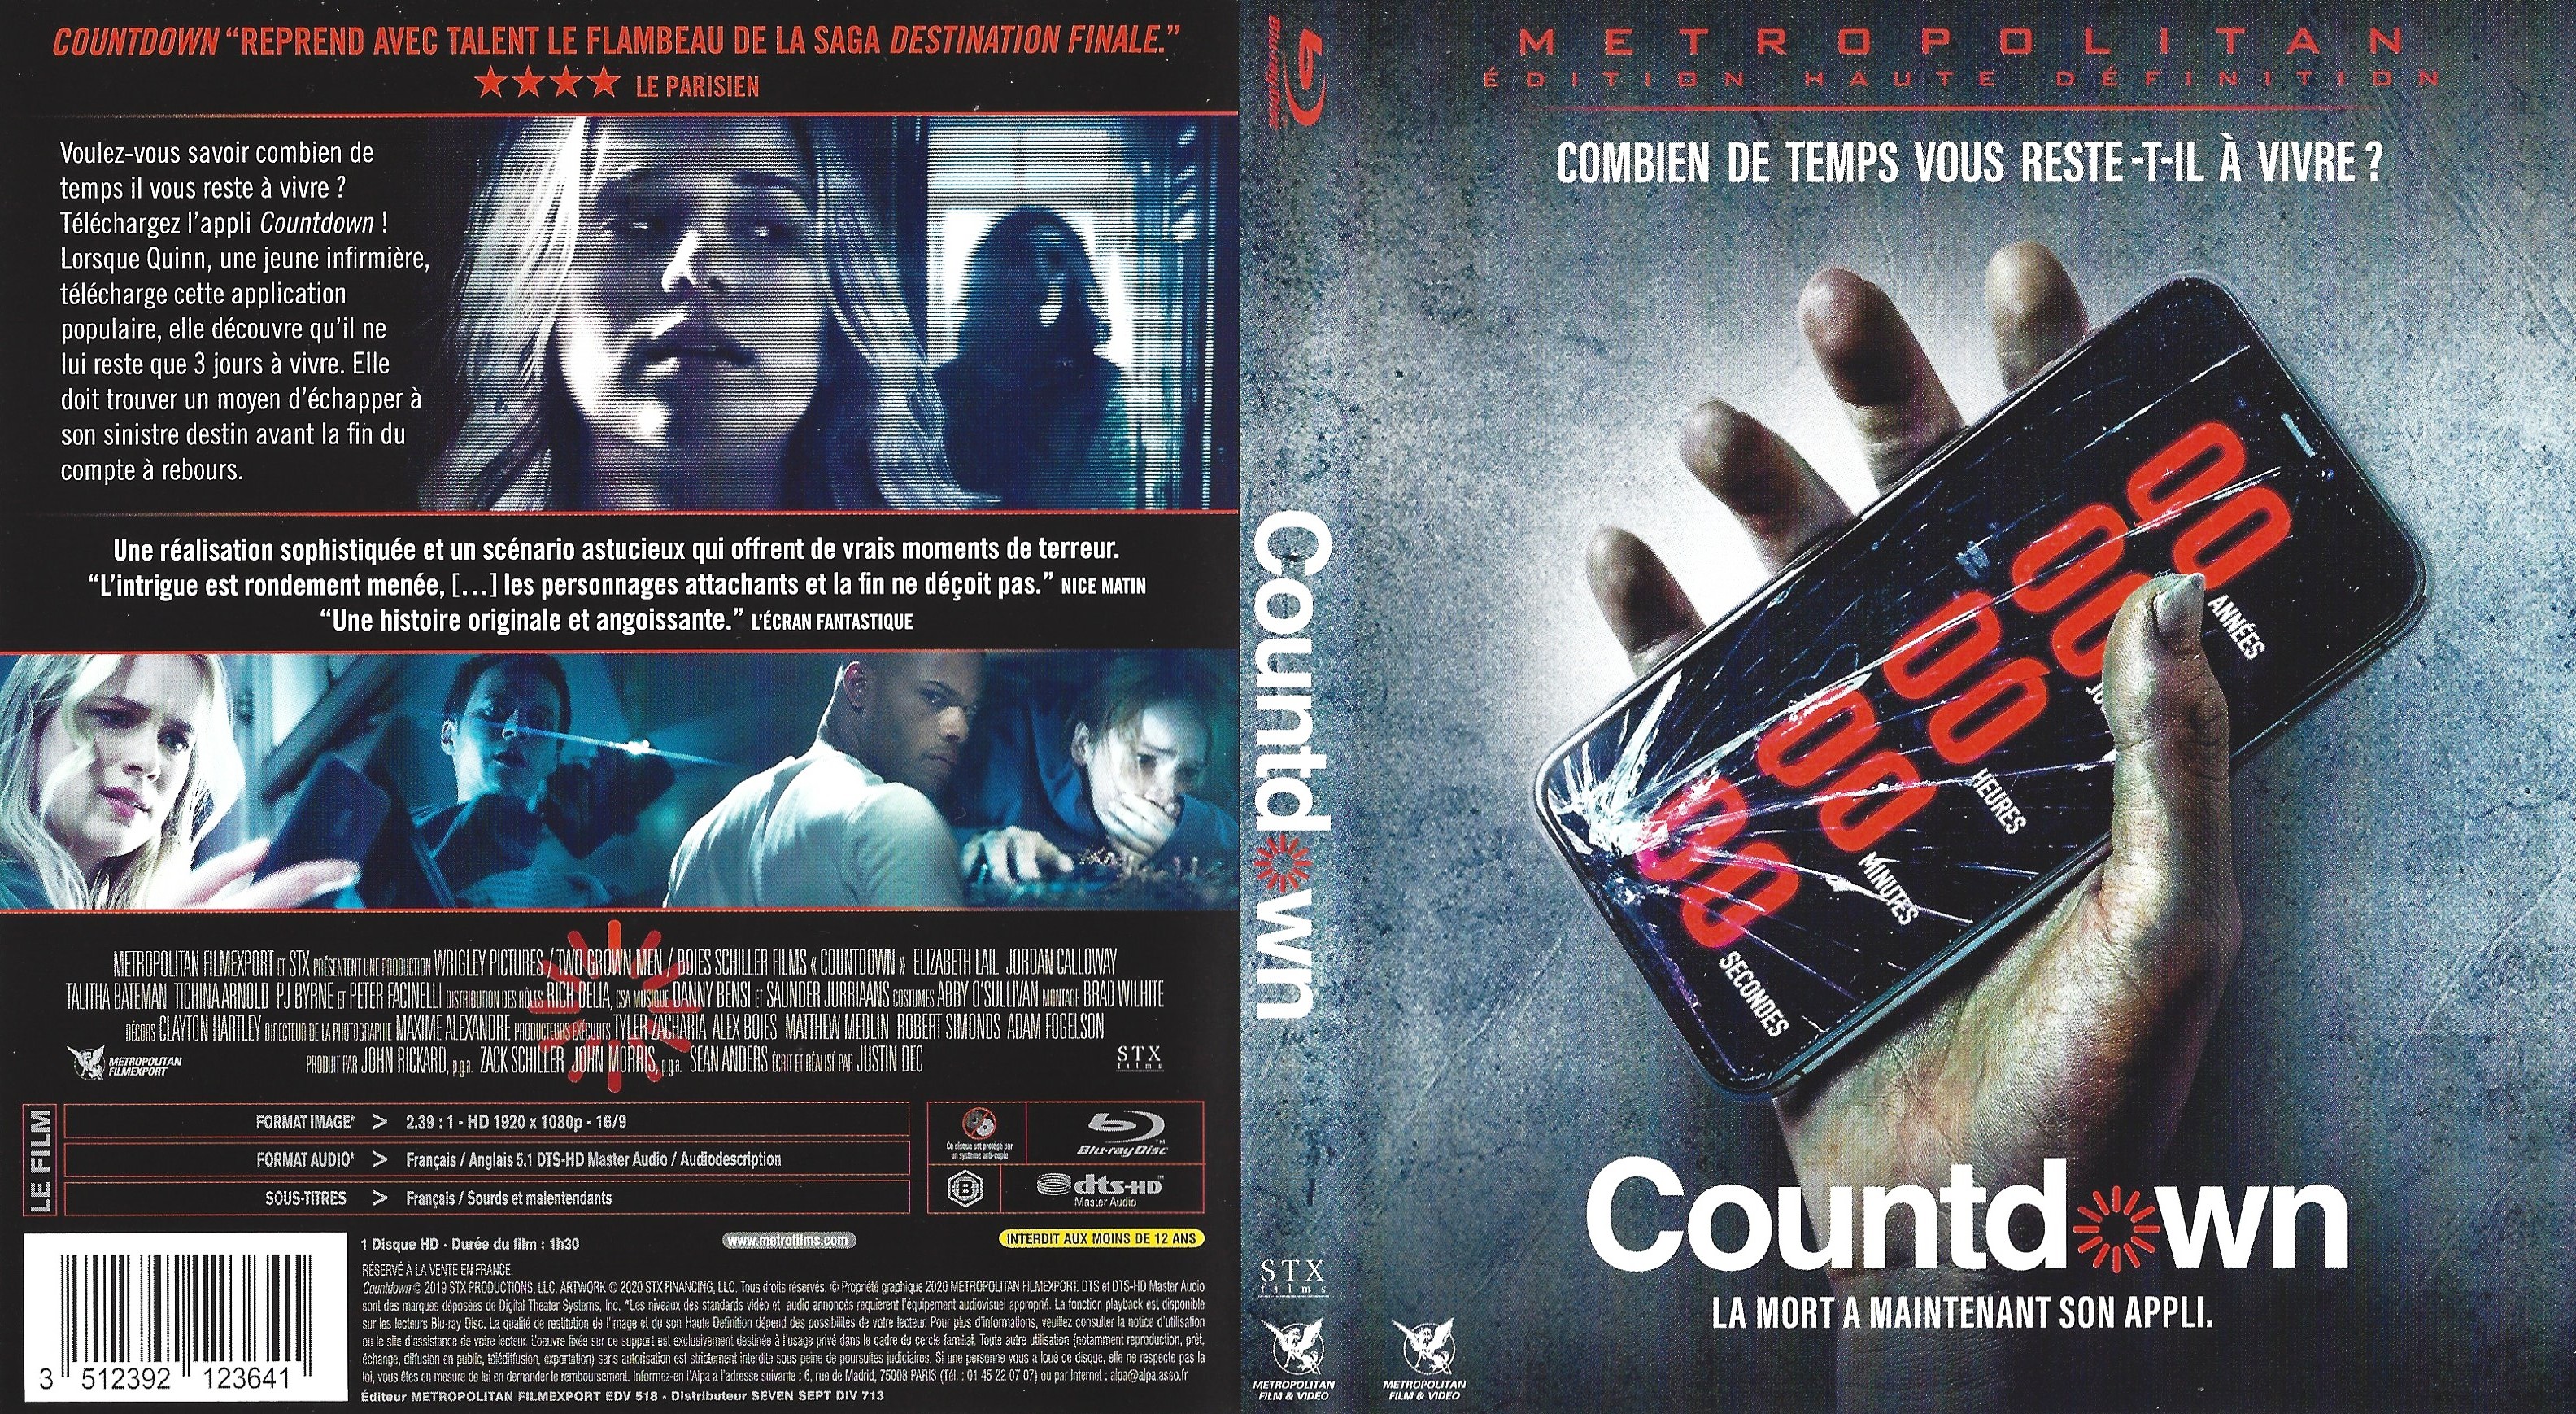 Jaquette DVD Countdown 2019 (BLU-RAY)